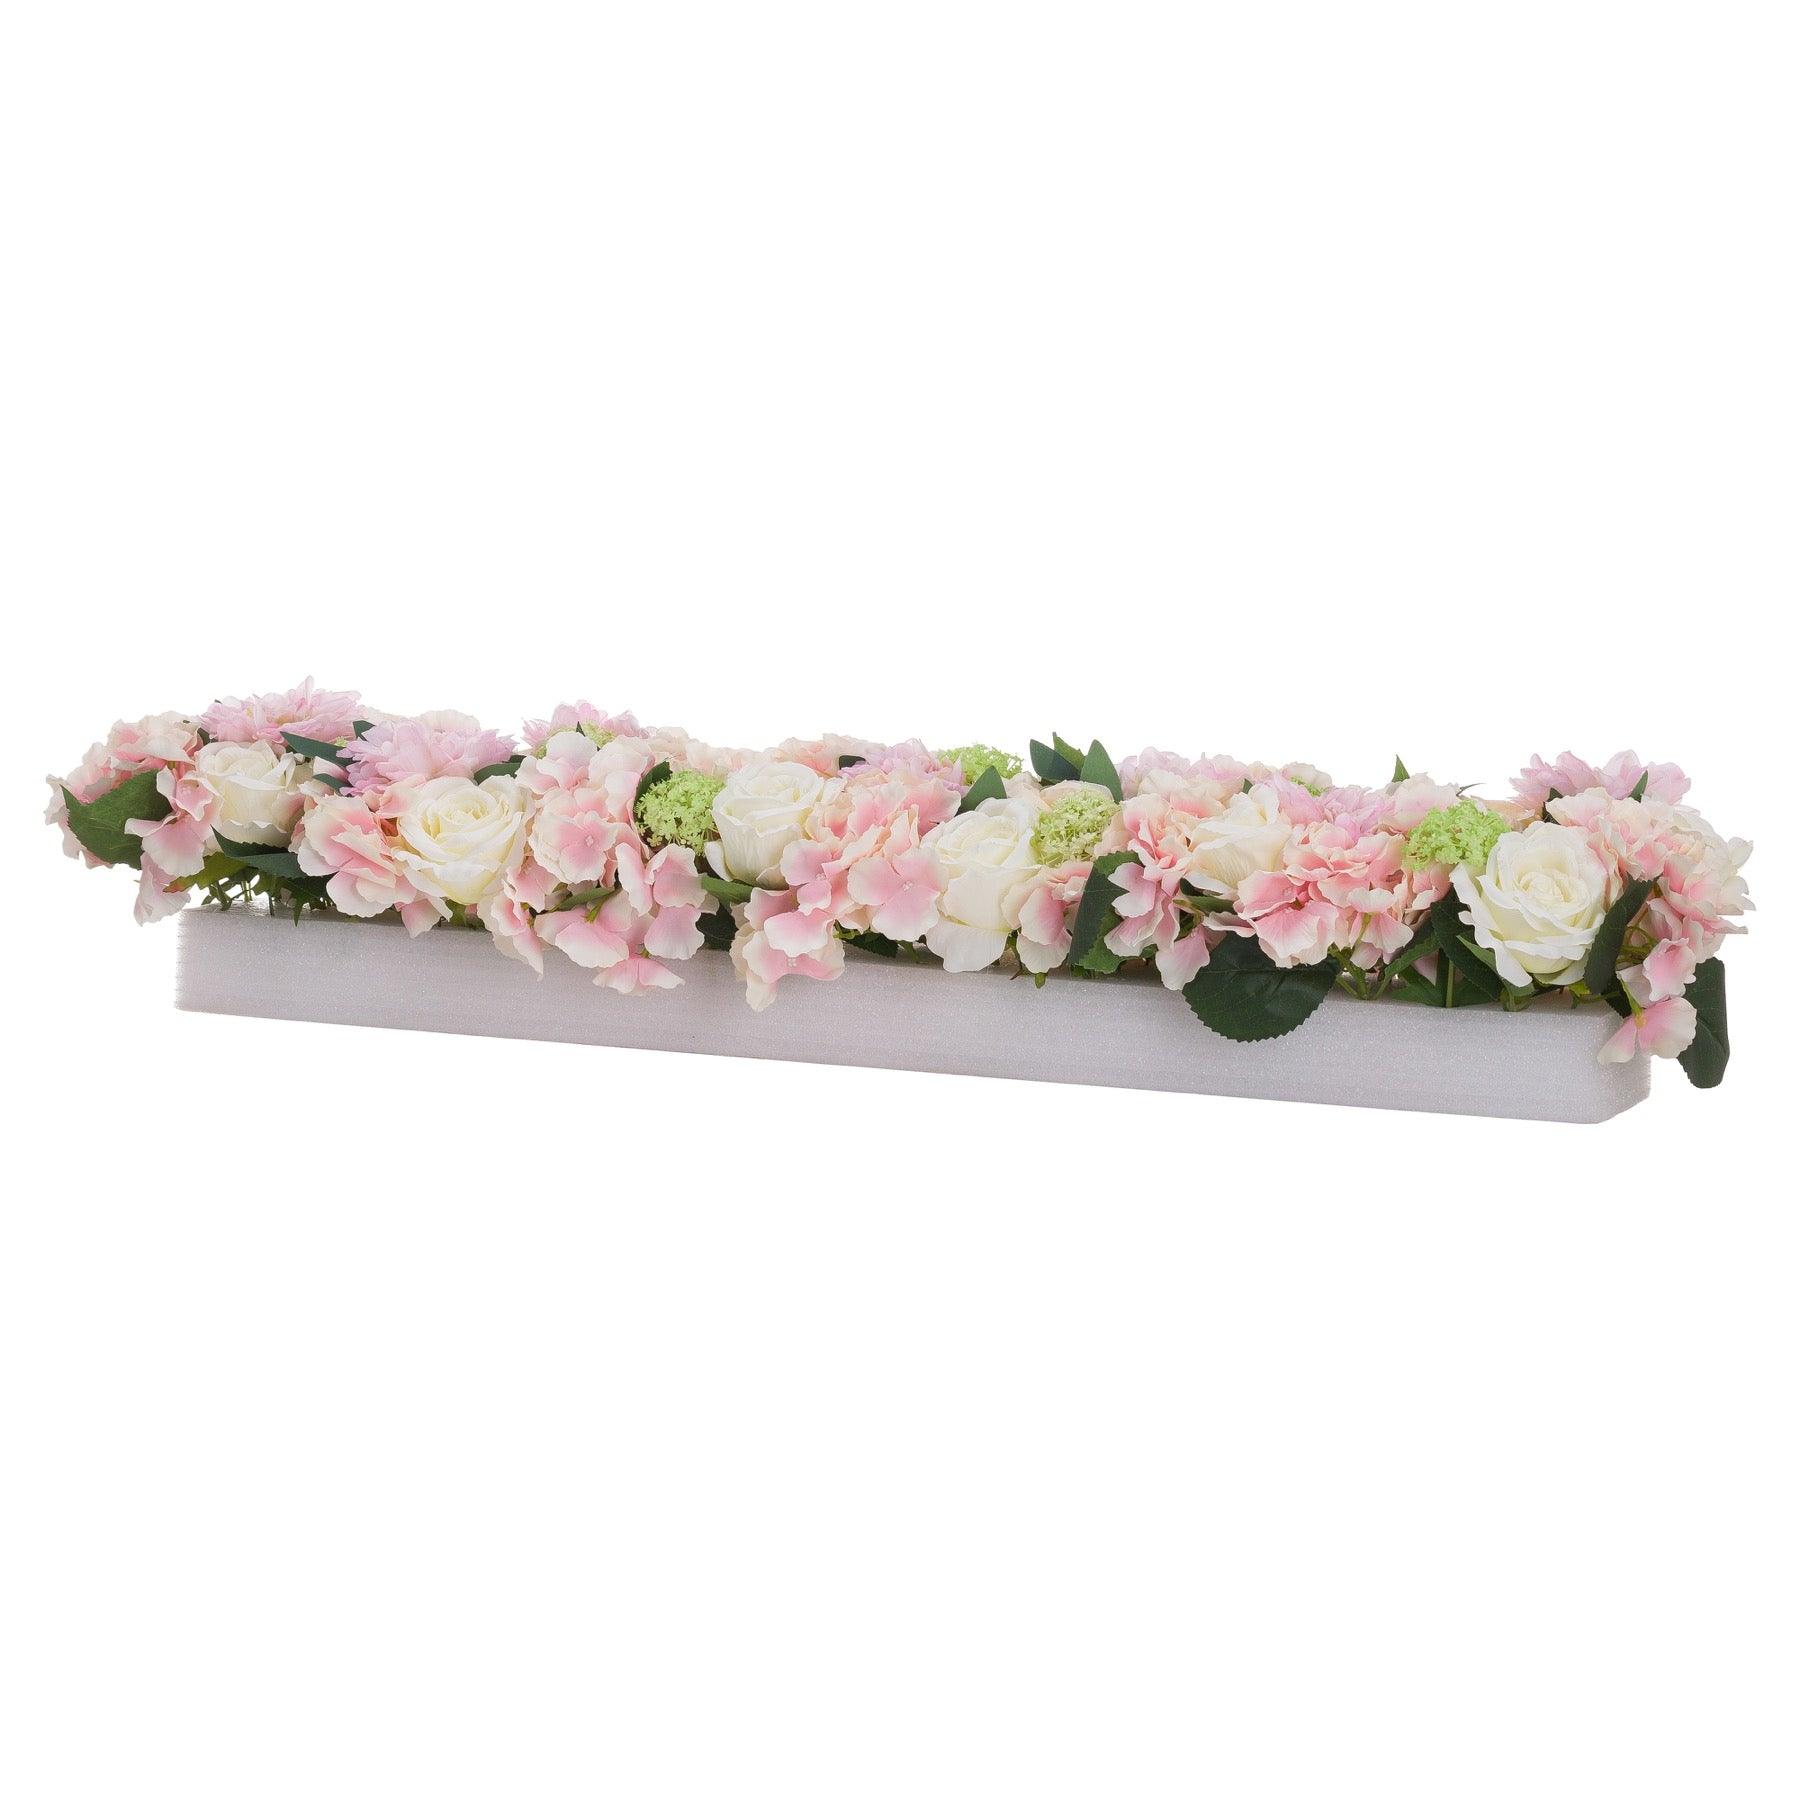 View Pink Dahlia Table Runner information